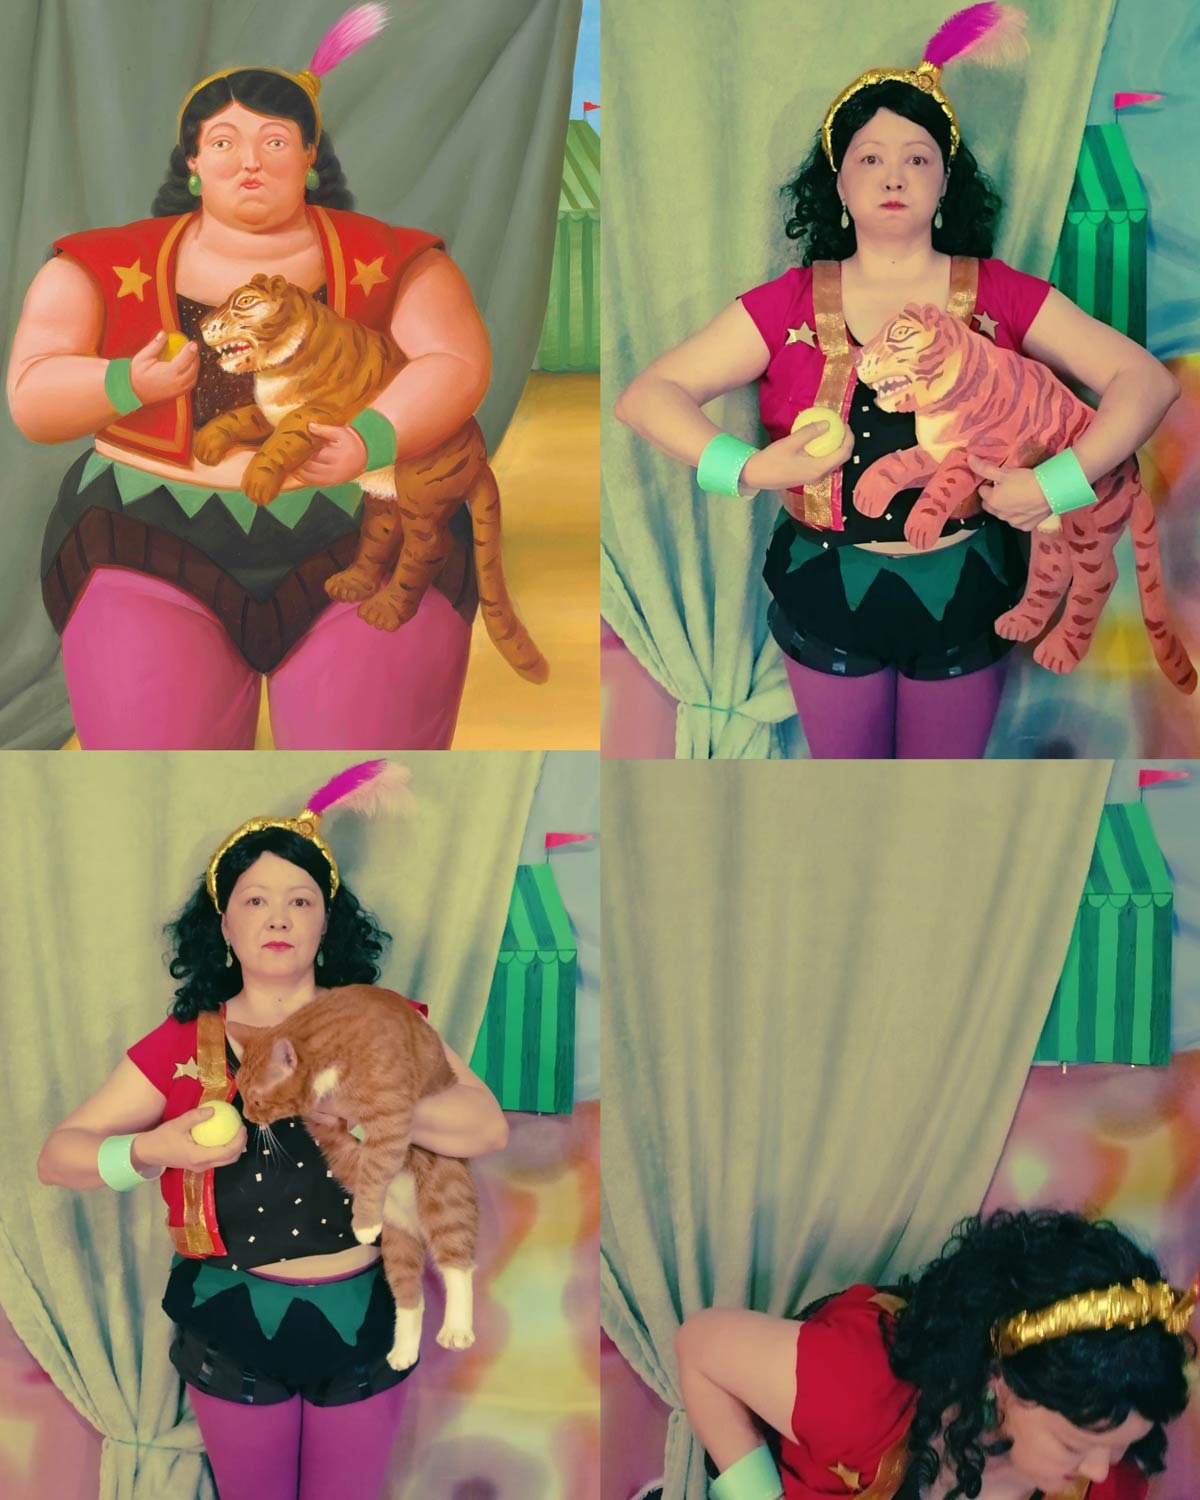 My homemade take on Circus woman with a baby tiger by Fernando Botero